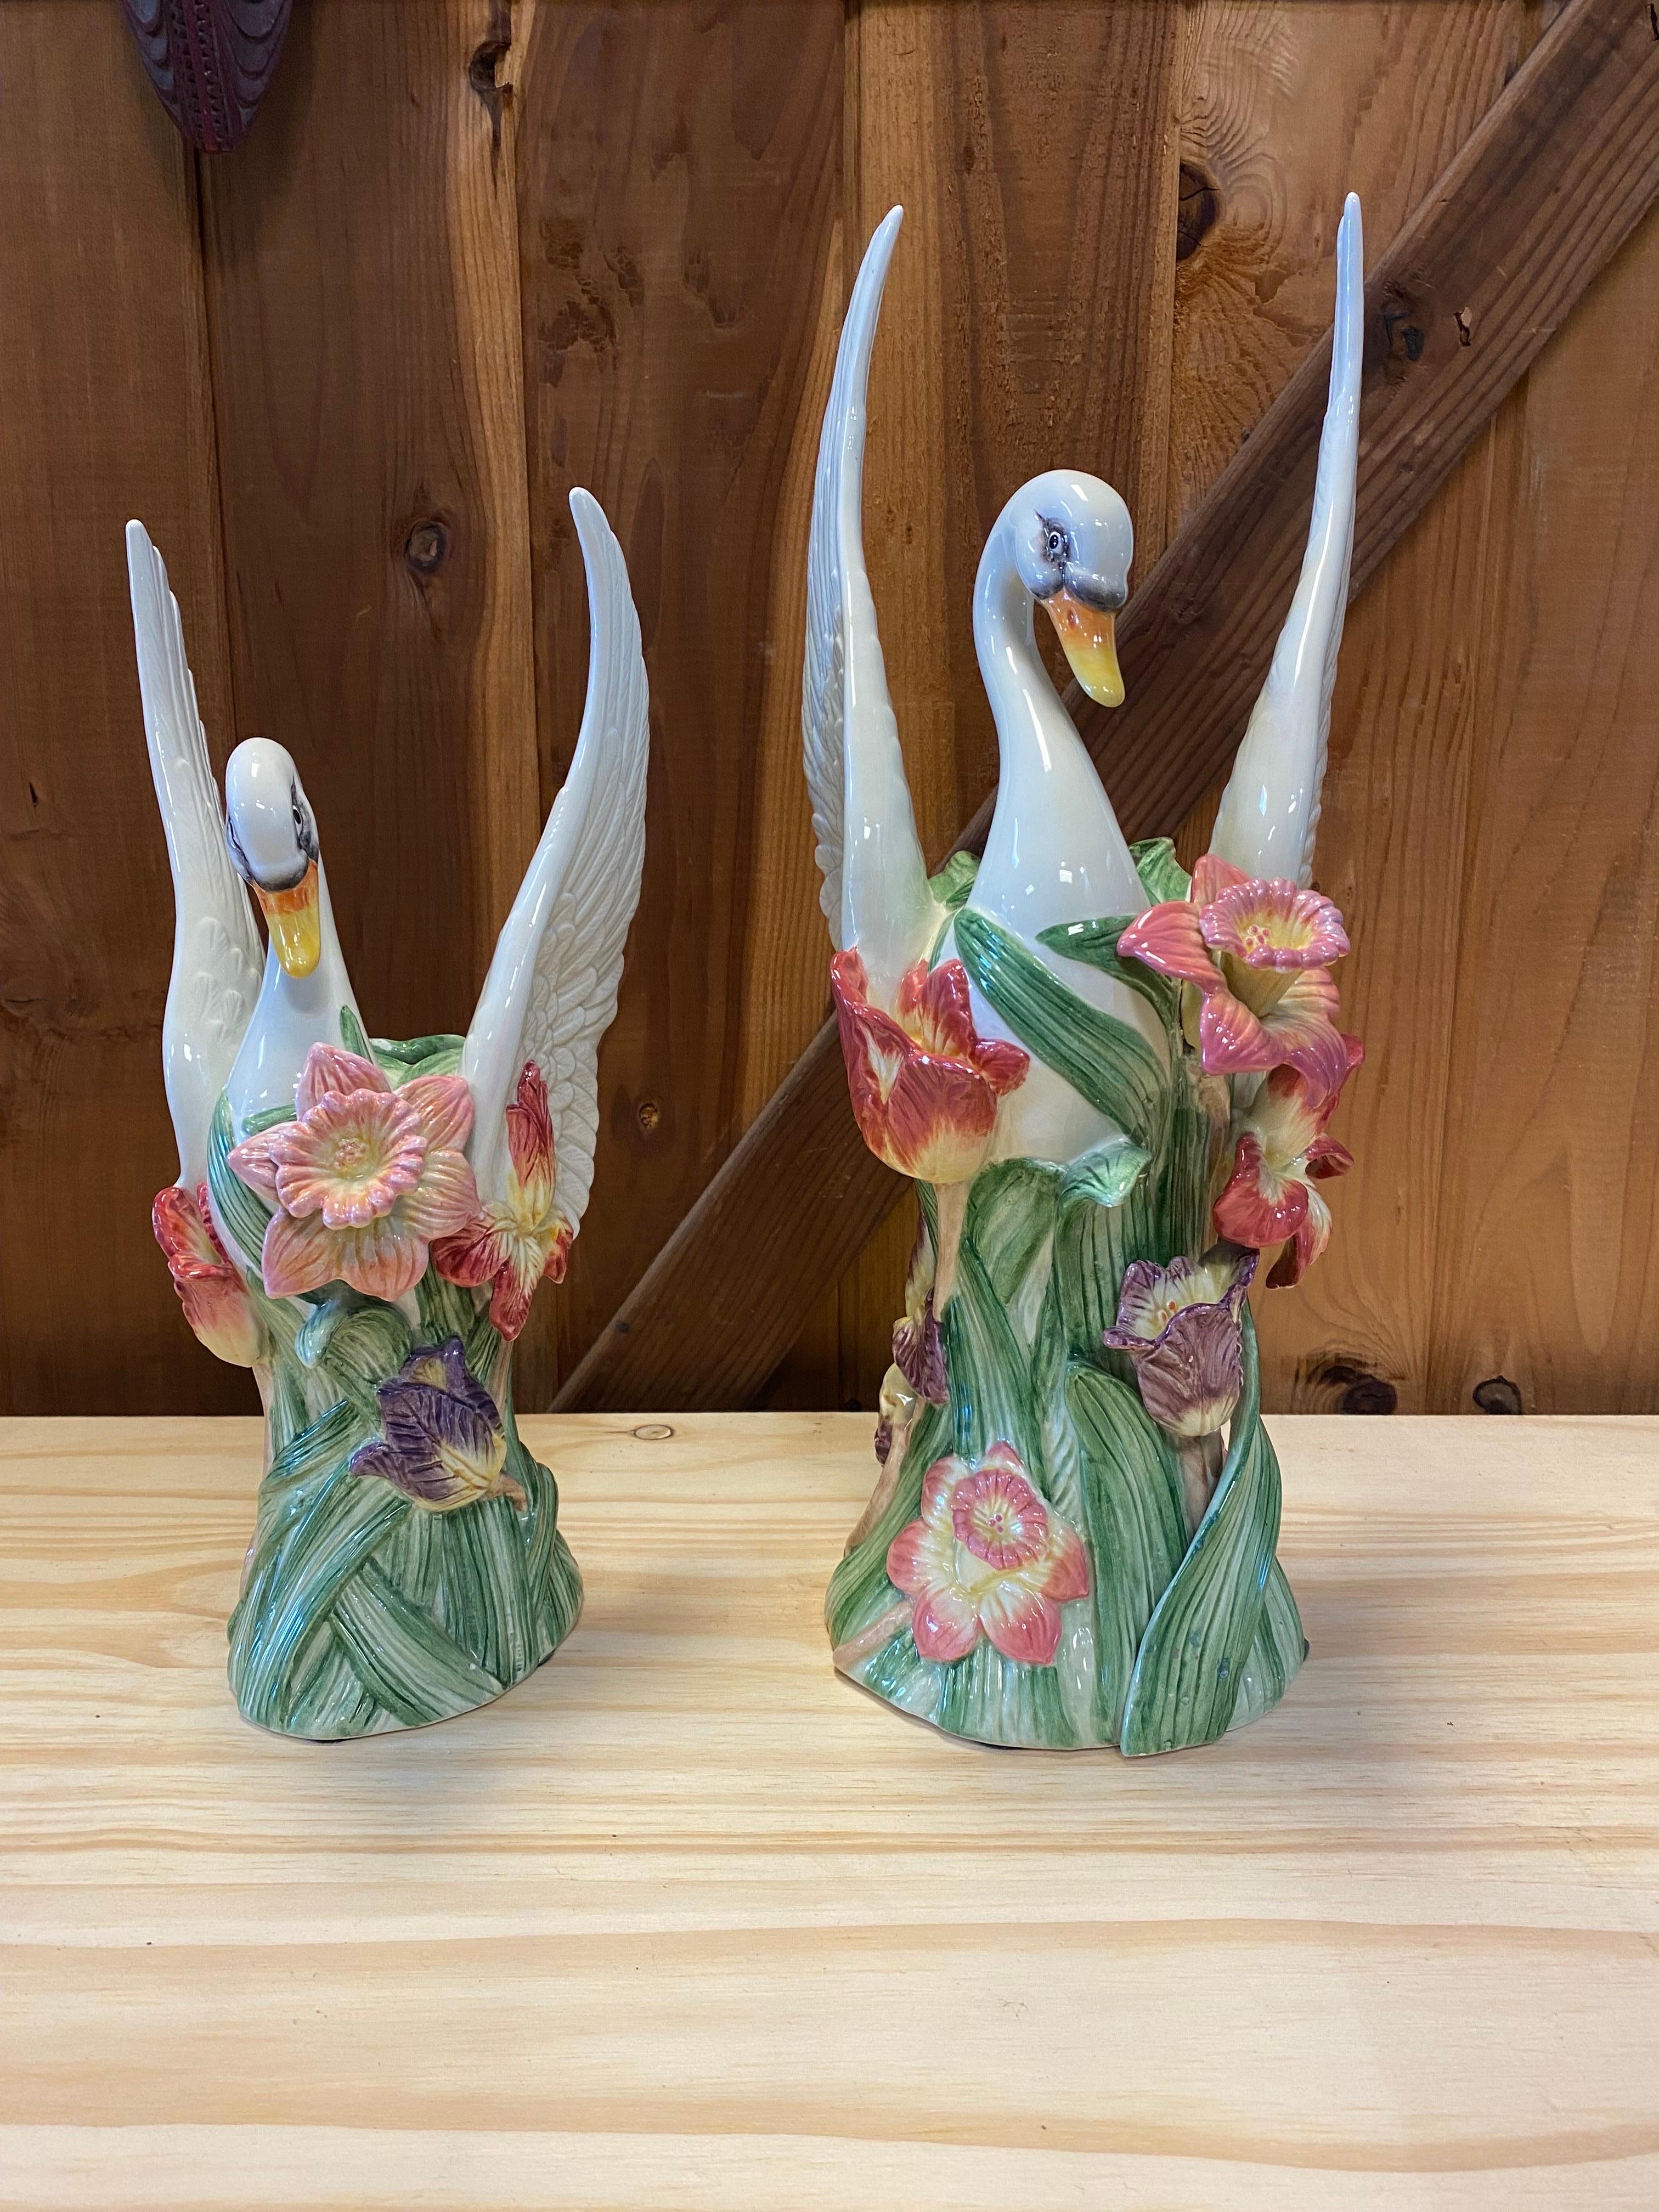 American Classical Vintage Porcelain Fitz and Floyd Swan Vases - A Pair